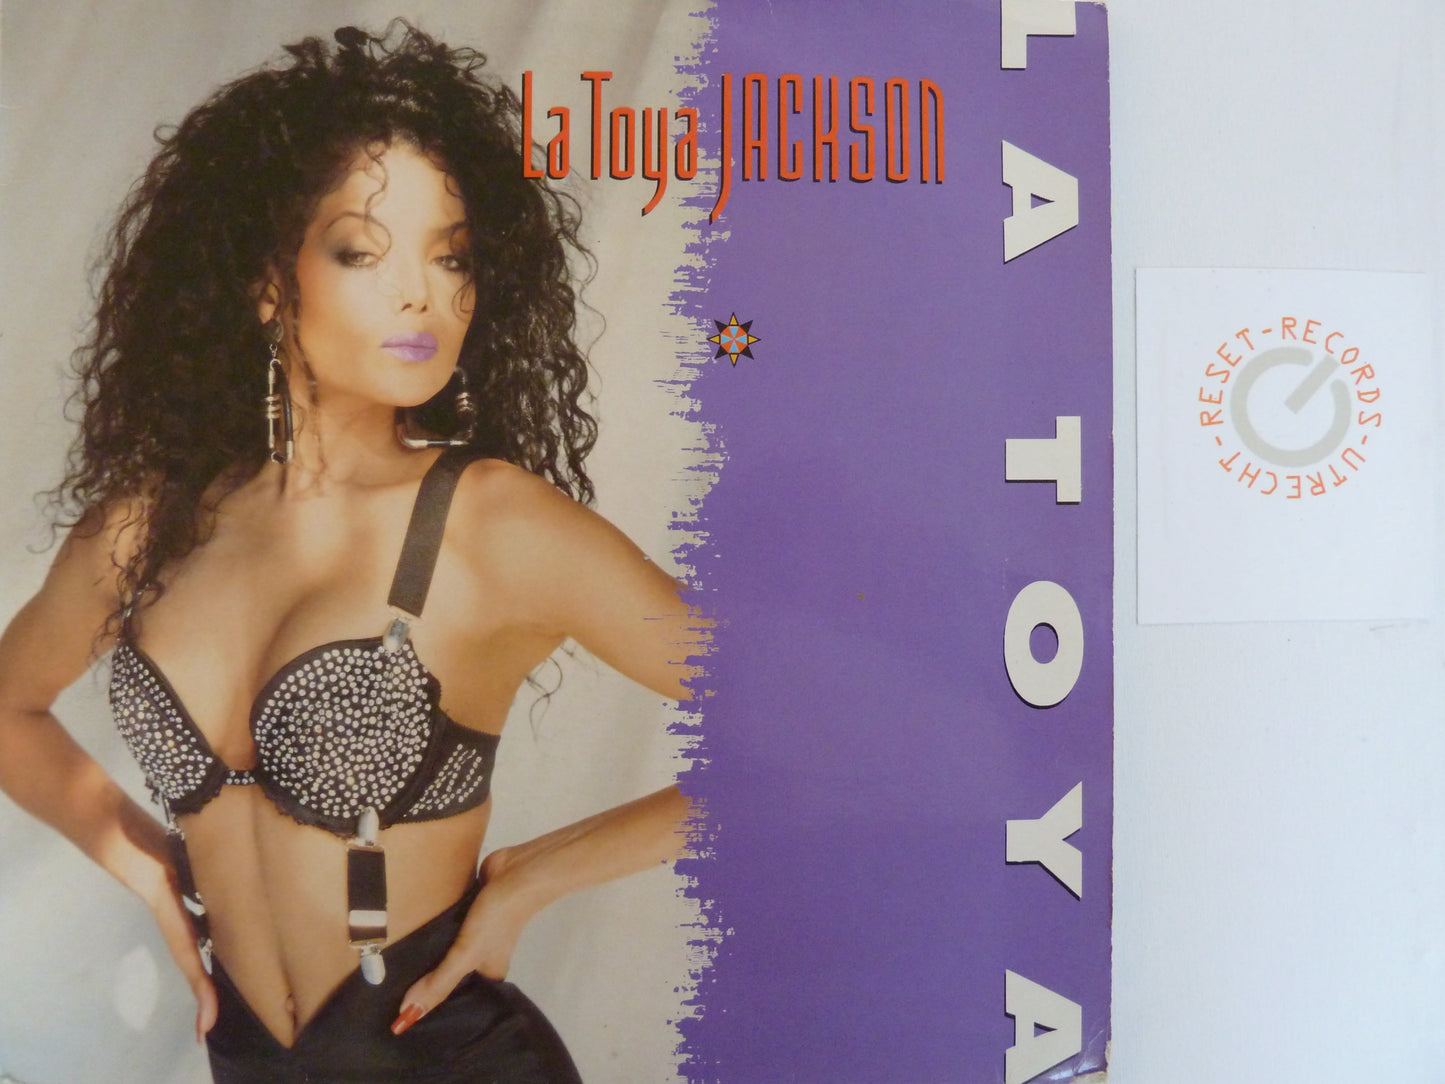 In the shadow of your famous family #5 inspired by La Toya Jackson – La Toya